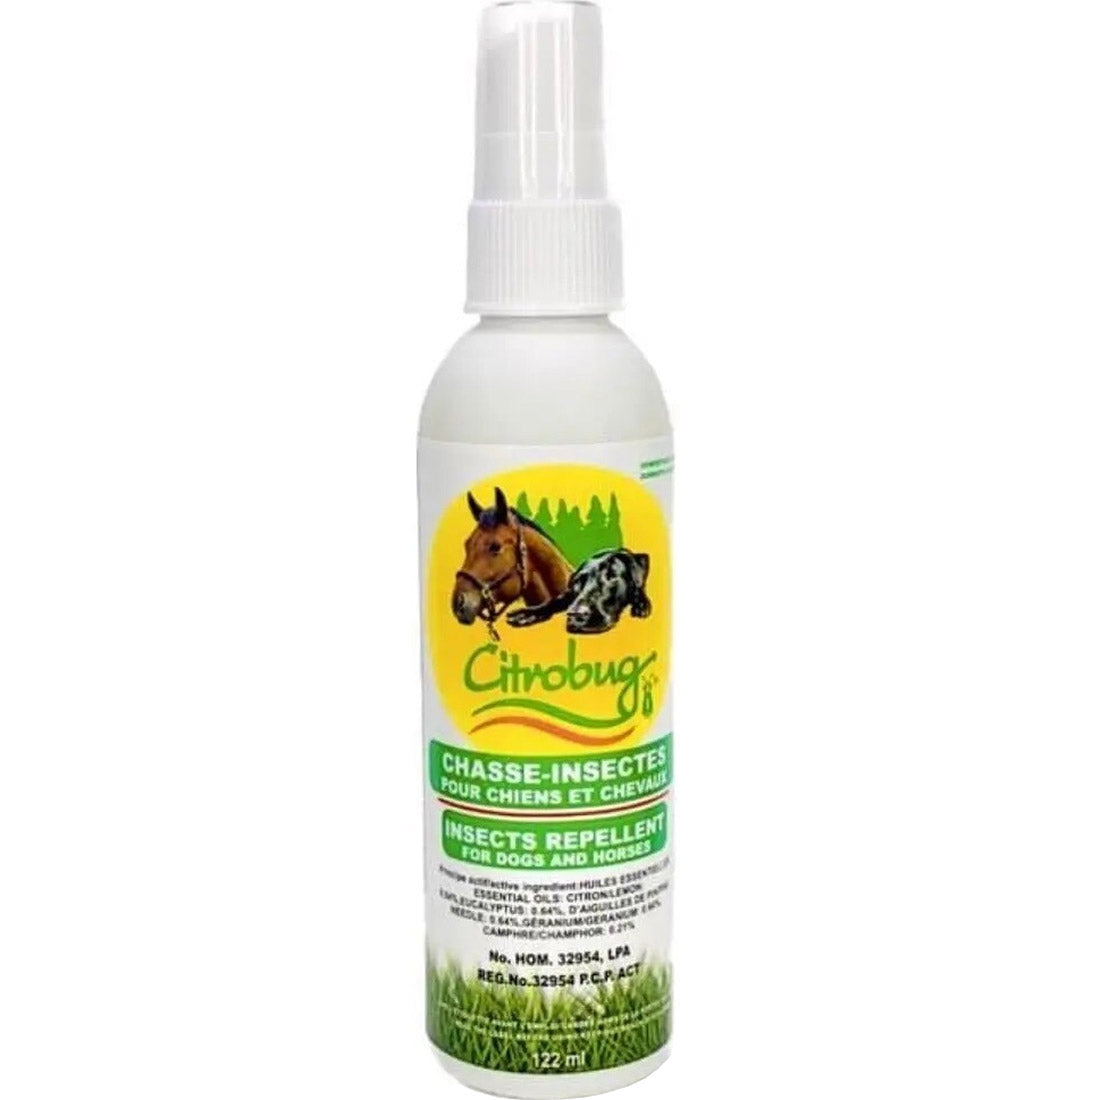 Citrobug Insect Repellent for Dogs and Horses, 125ml (NEW!)